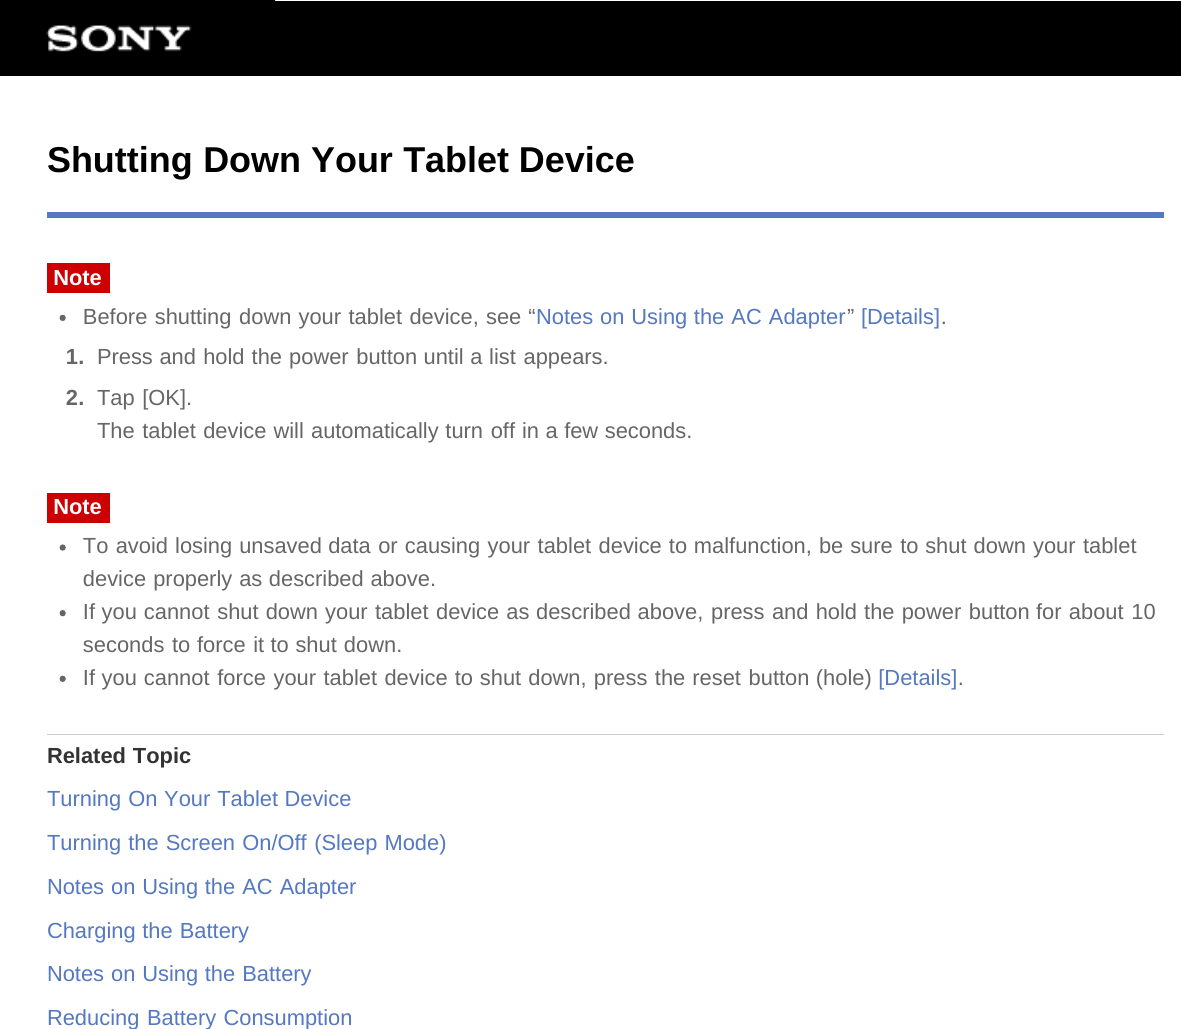 Shutting Down Your Tablet DeviceNoteBefore shutting down your tablet device, see “Notes on Using the AC Adapter” [Details].1.  Press and hold the power button until a list appears.2.  Tap [OK].The tablet device will automatically turn off in a few seconds.NoteTo avoid losing unsaved data or causing your tablet device to malfunction, be sure to shut down your tabletdevice properly as described above.If you cannot shut down your tablet device as described above, press and hold the power button for about 10seconds to force it to shut down.If you cannot force your tablet device to shut down, press the reset button (hole) [Details].Related TopicTurning On Your Tablet DeviceTurning the Screen On/Off (Sleep Mode)Notes on Using the AC AdapterCharging the BatteryNotes on Using the BatteryReducing Battery Consumption